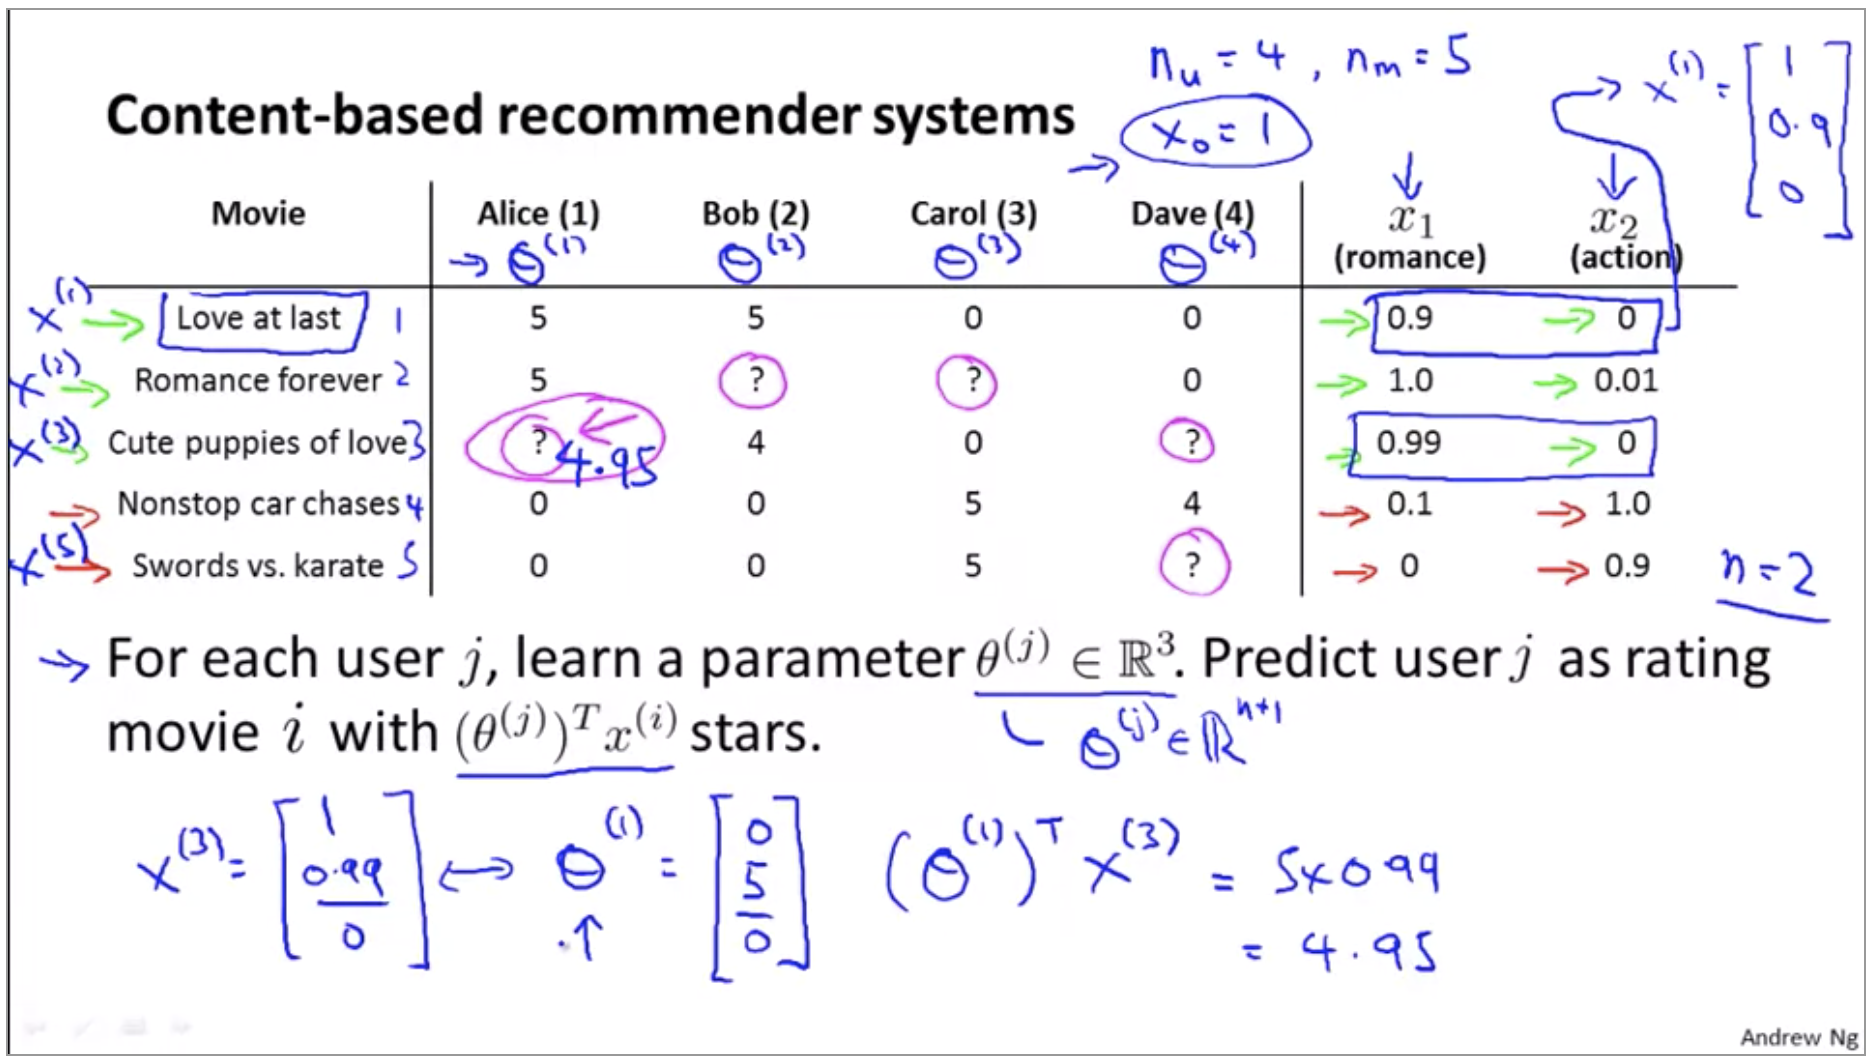 recommender-system-content-based.png